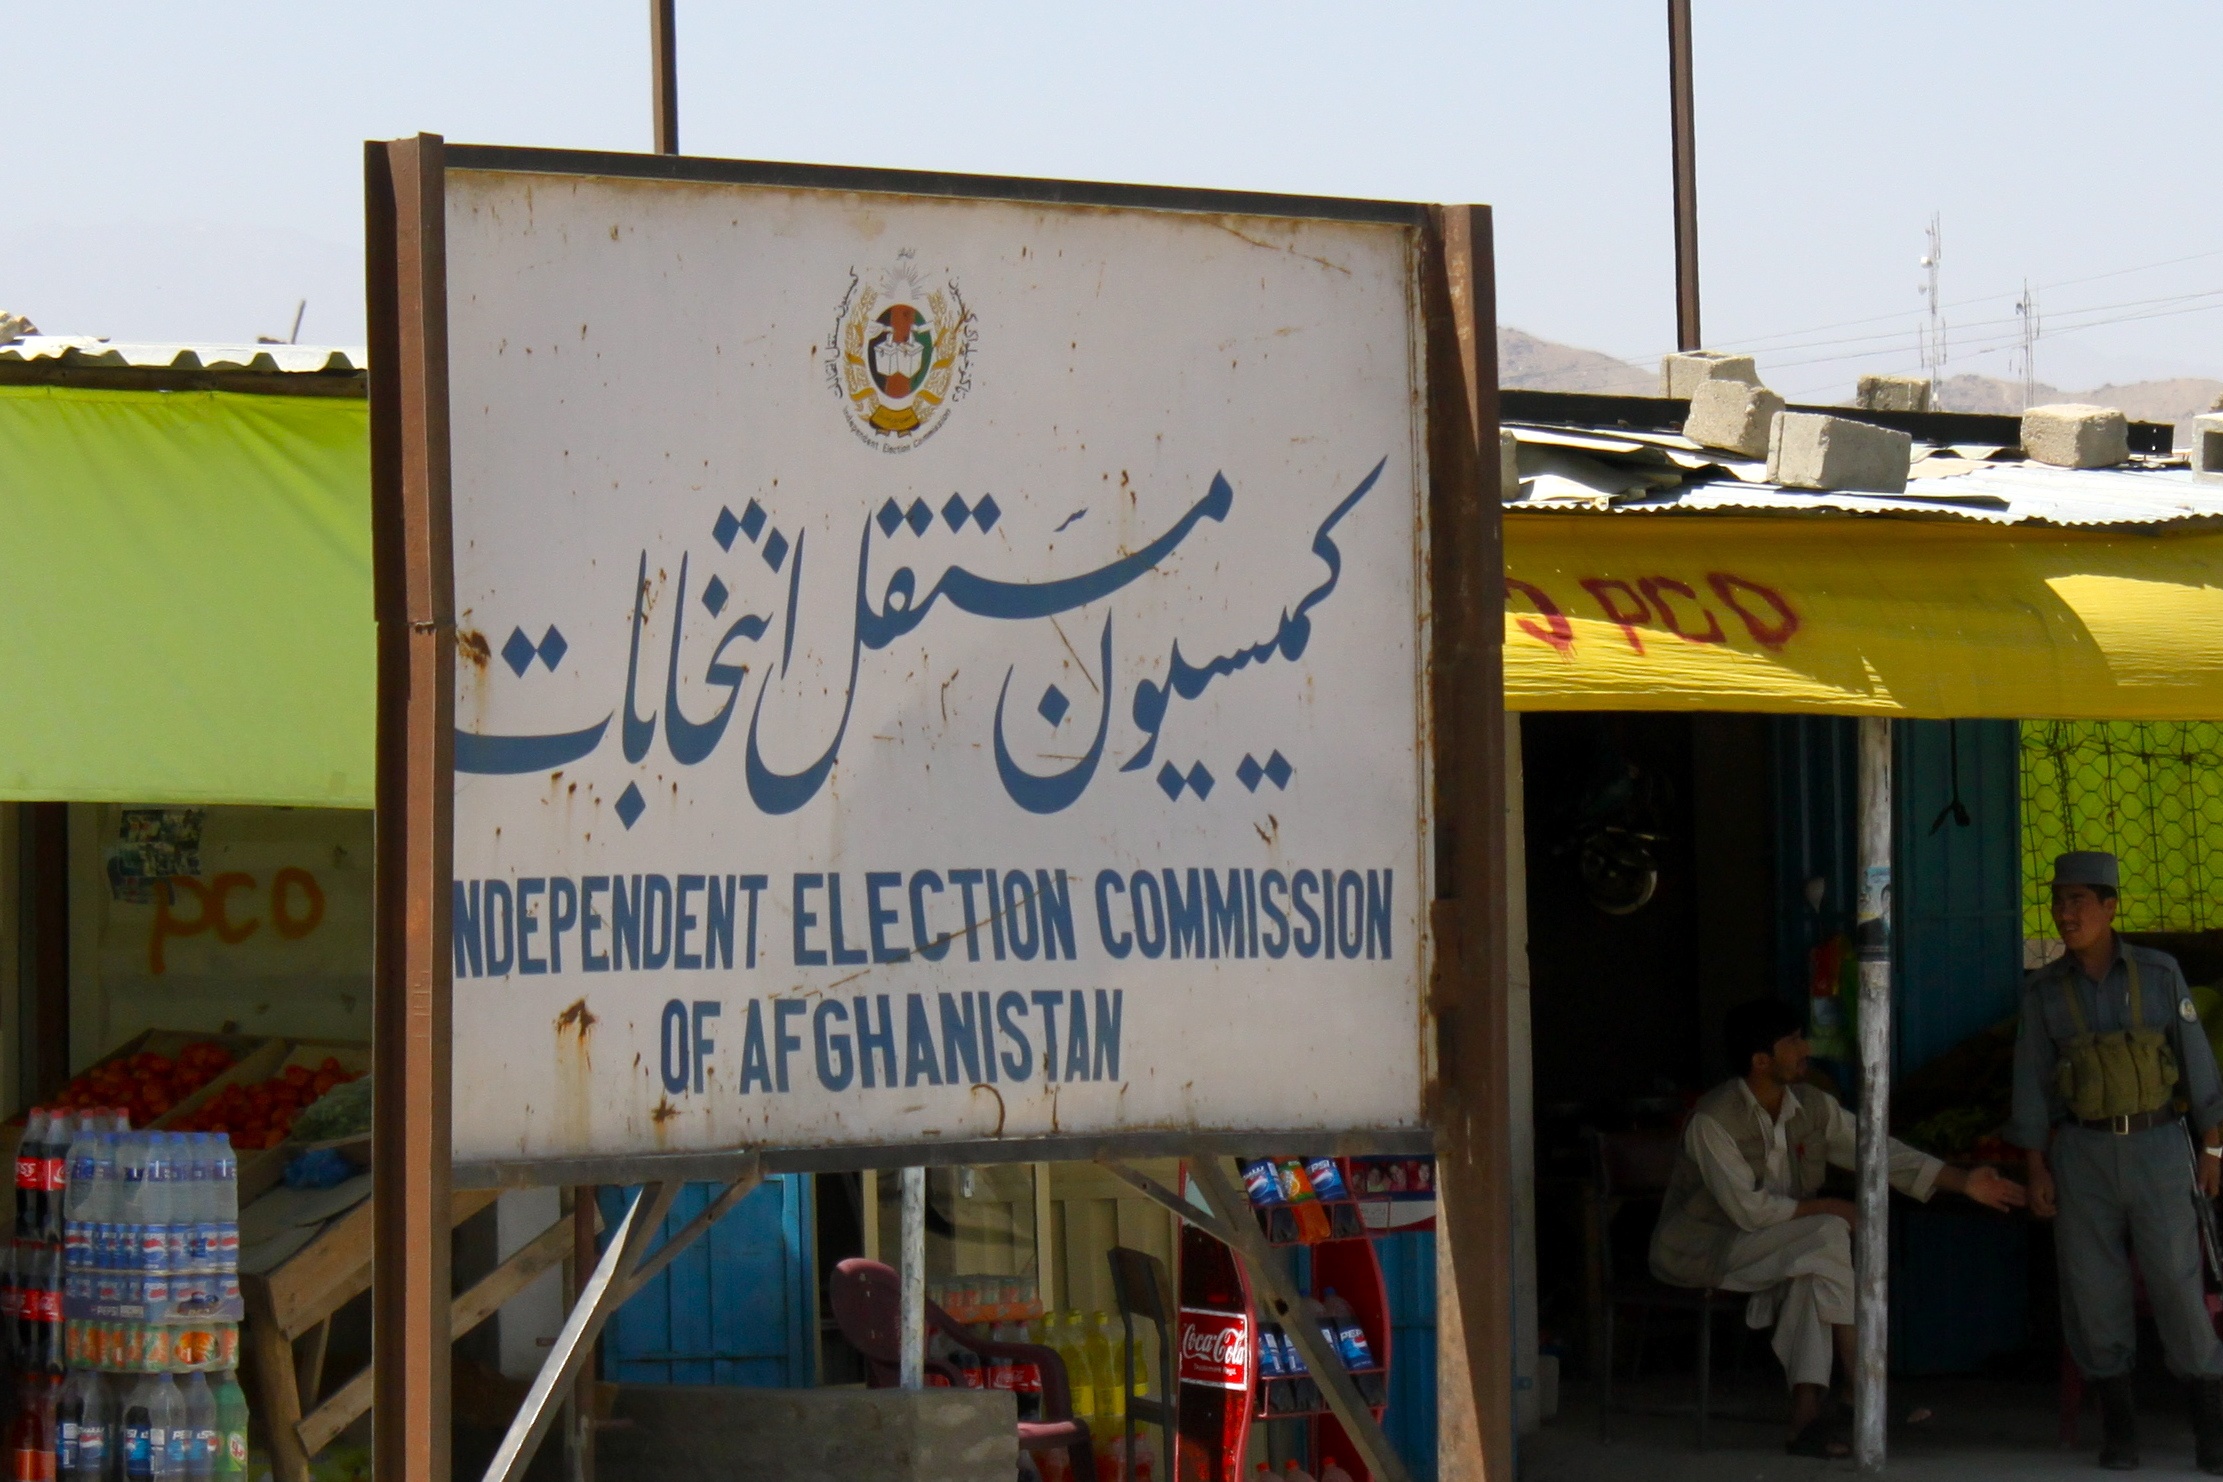 The Independent Election Commission is embroiled in a scandal following the 2014 Afghan vote. Photo via Wikipedia Commons